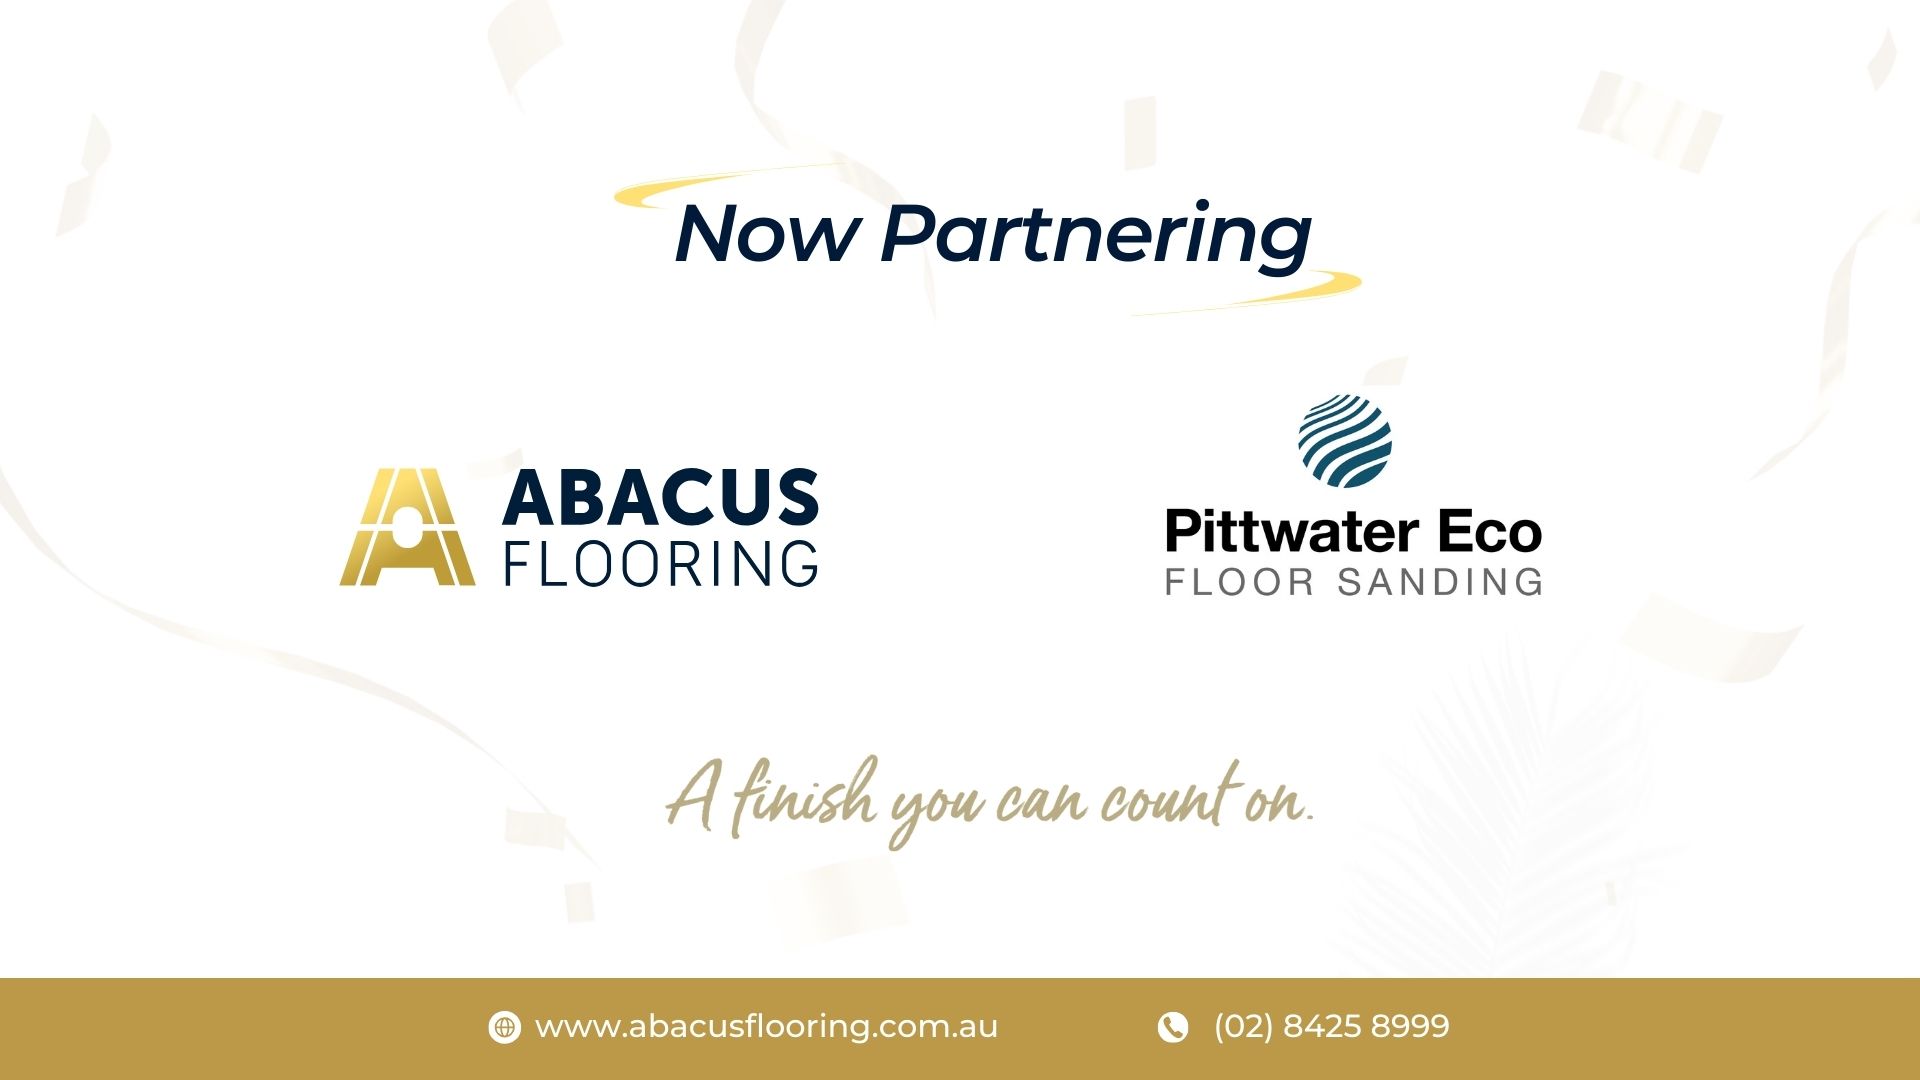 Why have Abacus Flooring and Pittwater Eco joined together?